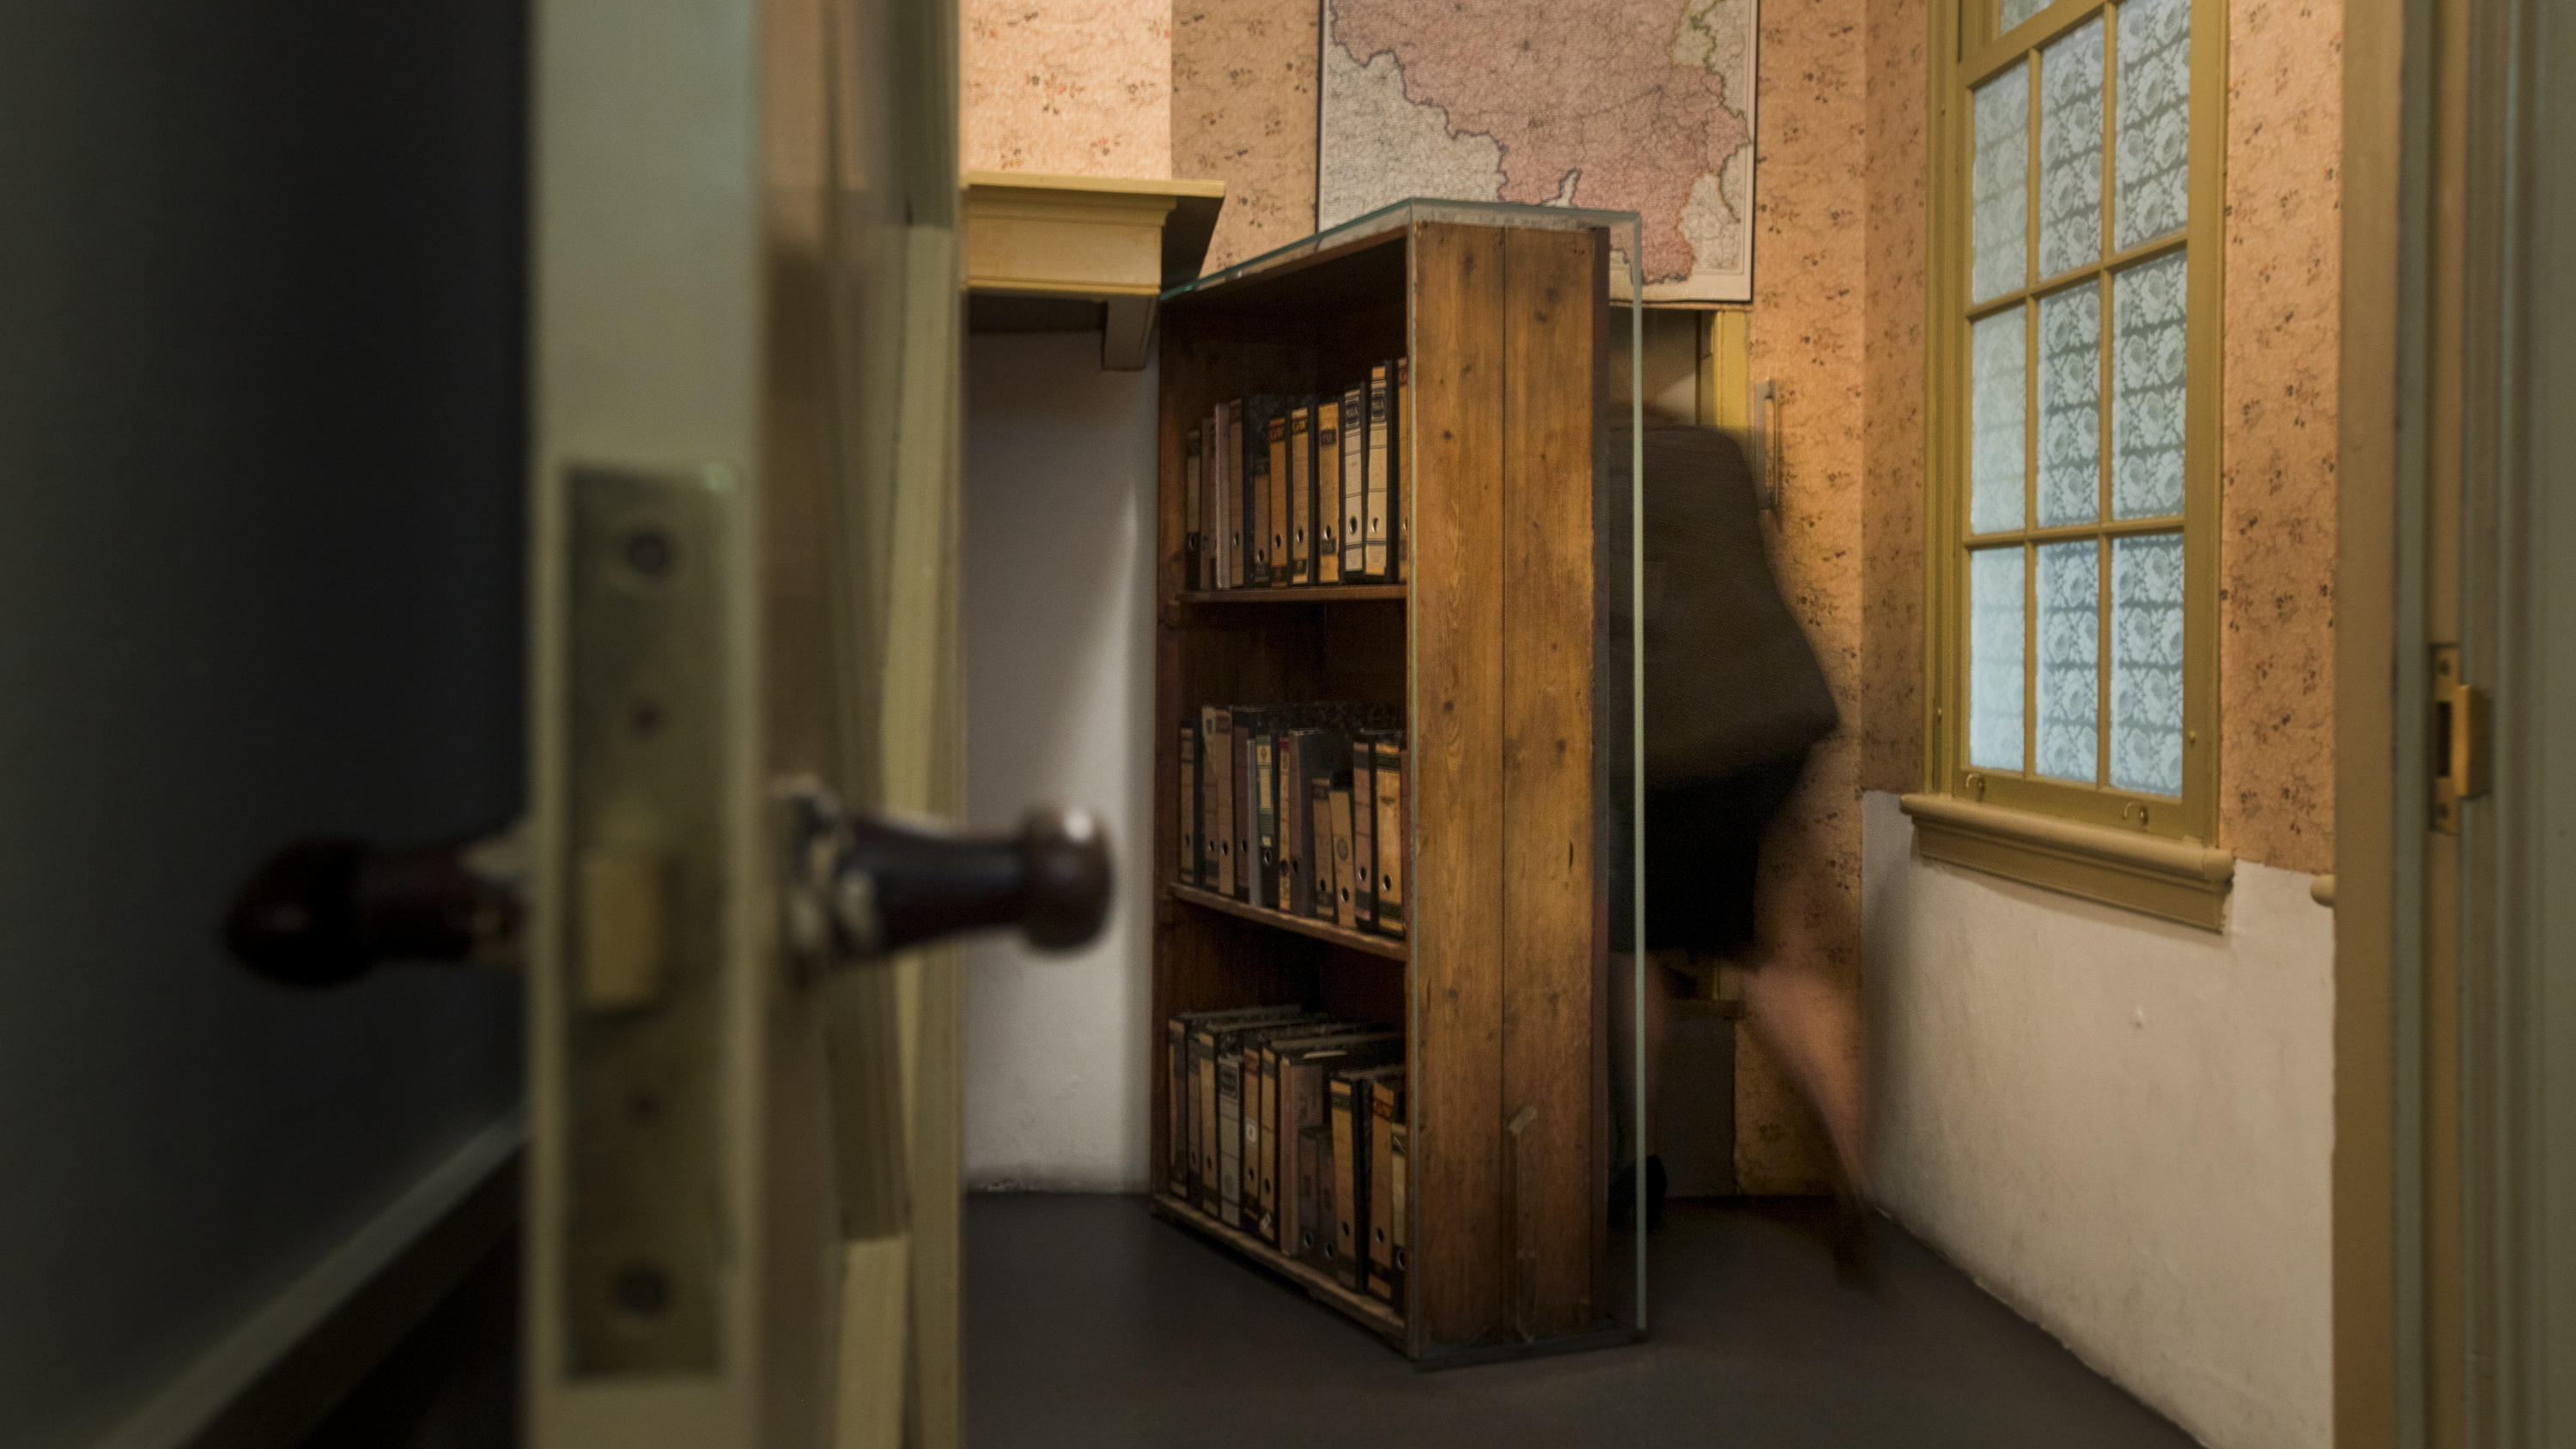 FILE- A woman enters the secret annex at the renovated Anne Frank House Museum in Amsterdam, Netherlands, Wednesday, Nov. 21, 2018. A cold case team that combed through evidence for five years may have solved one of World War II's enduring mysteries: